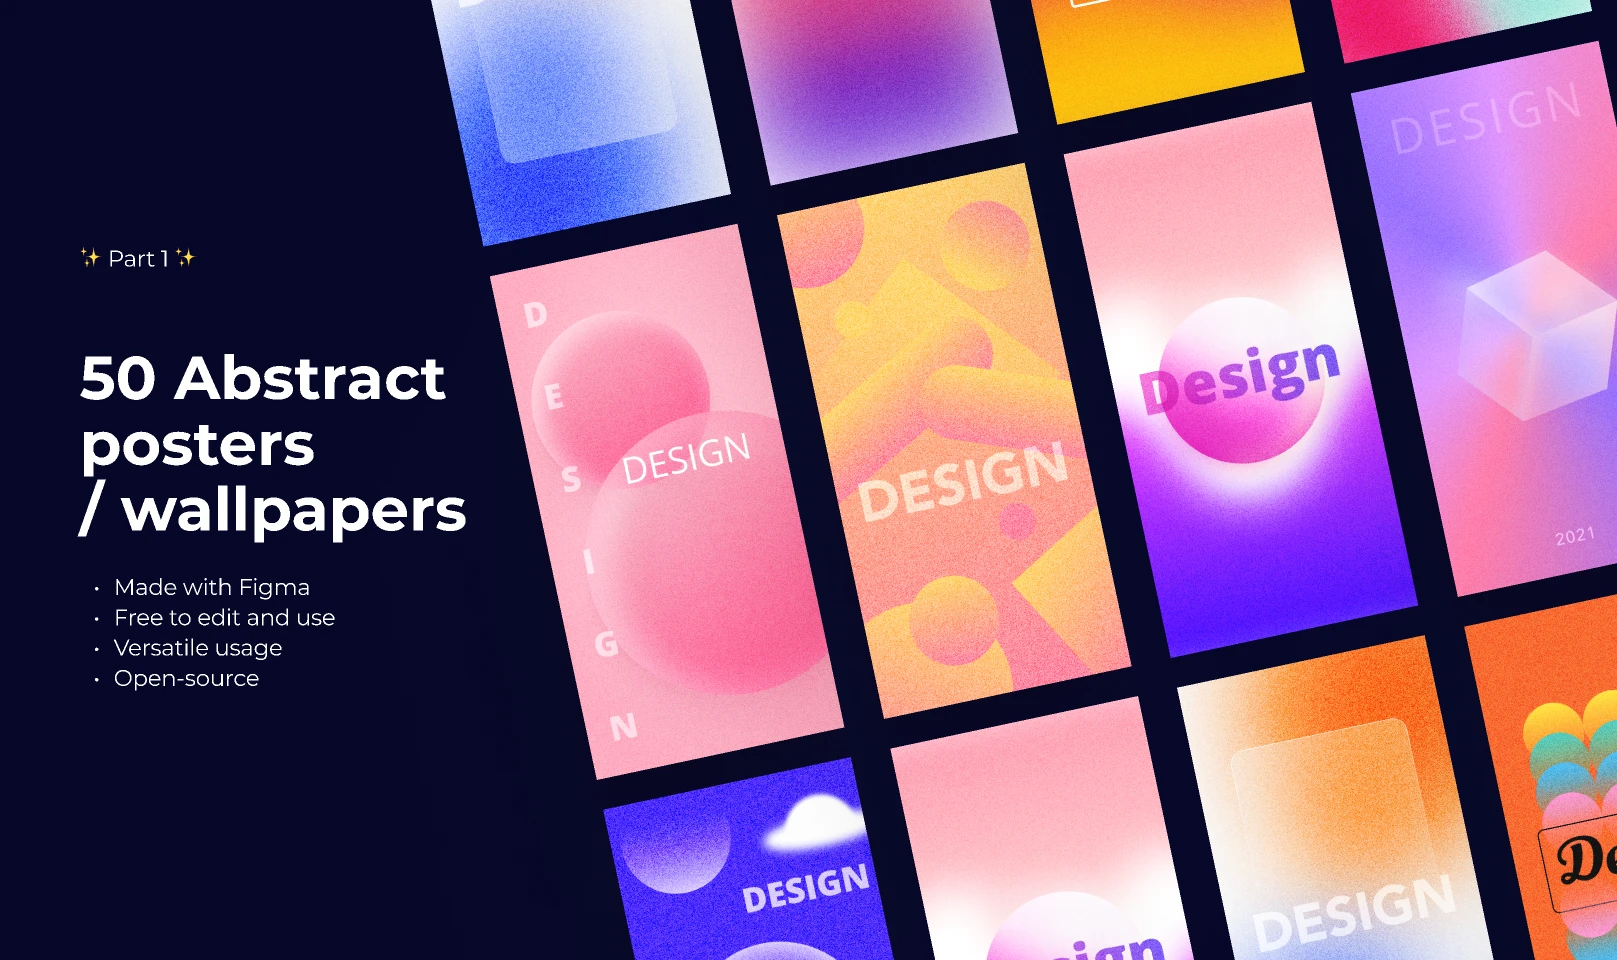 50 Abstract posters/wallpapers (Part 1) for Figma and Adobe XD